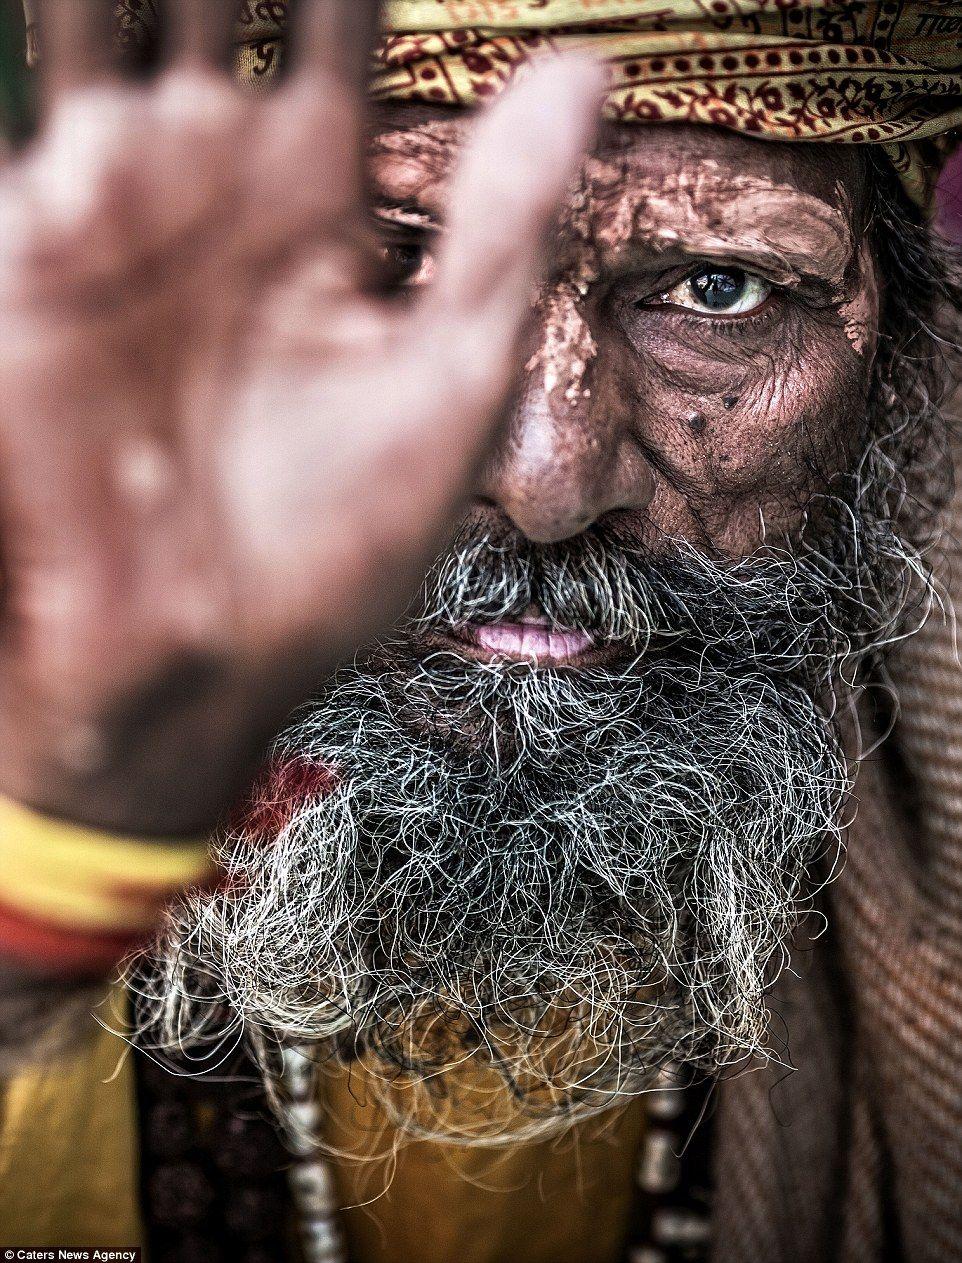 Incredible image show life of India's cannibal Aghori tribe